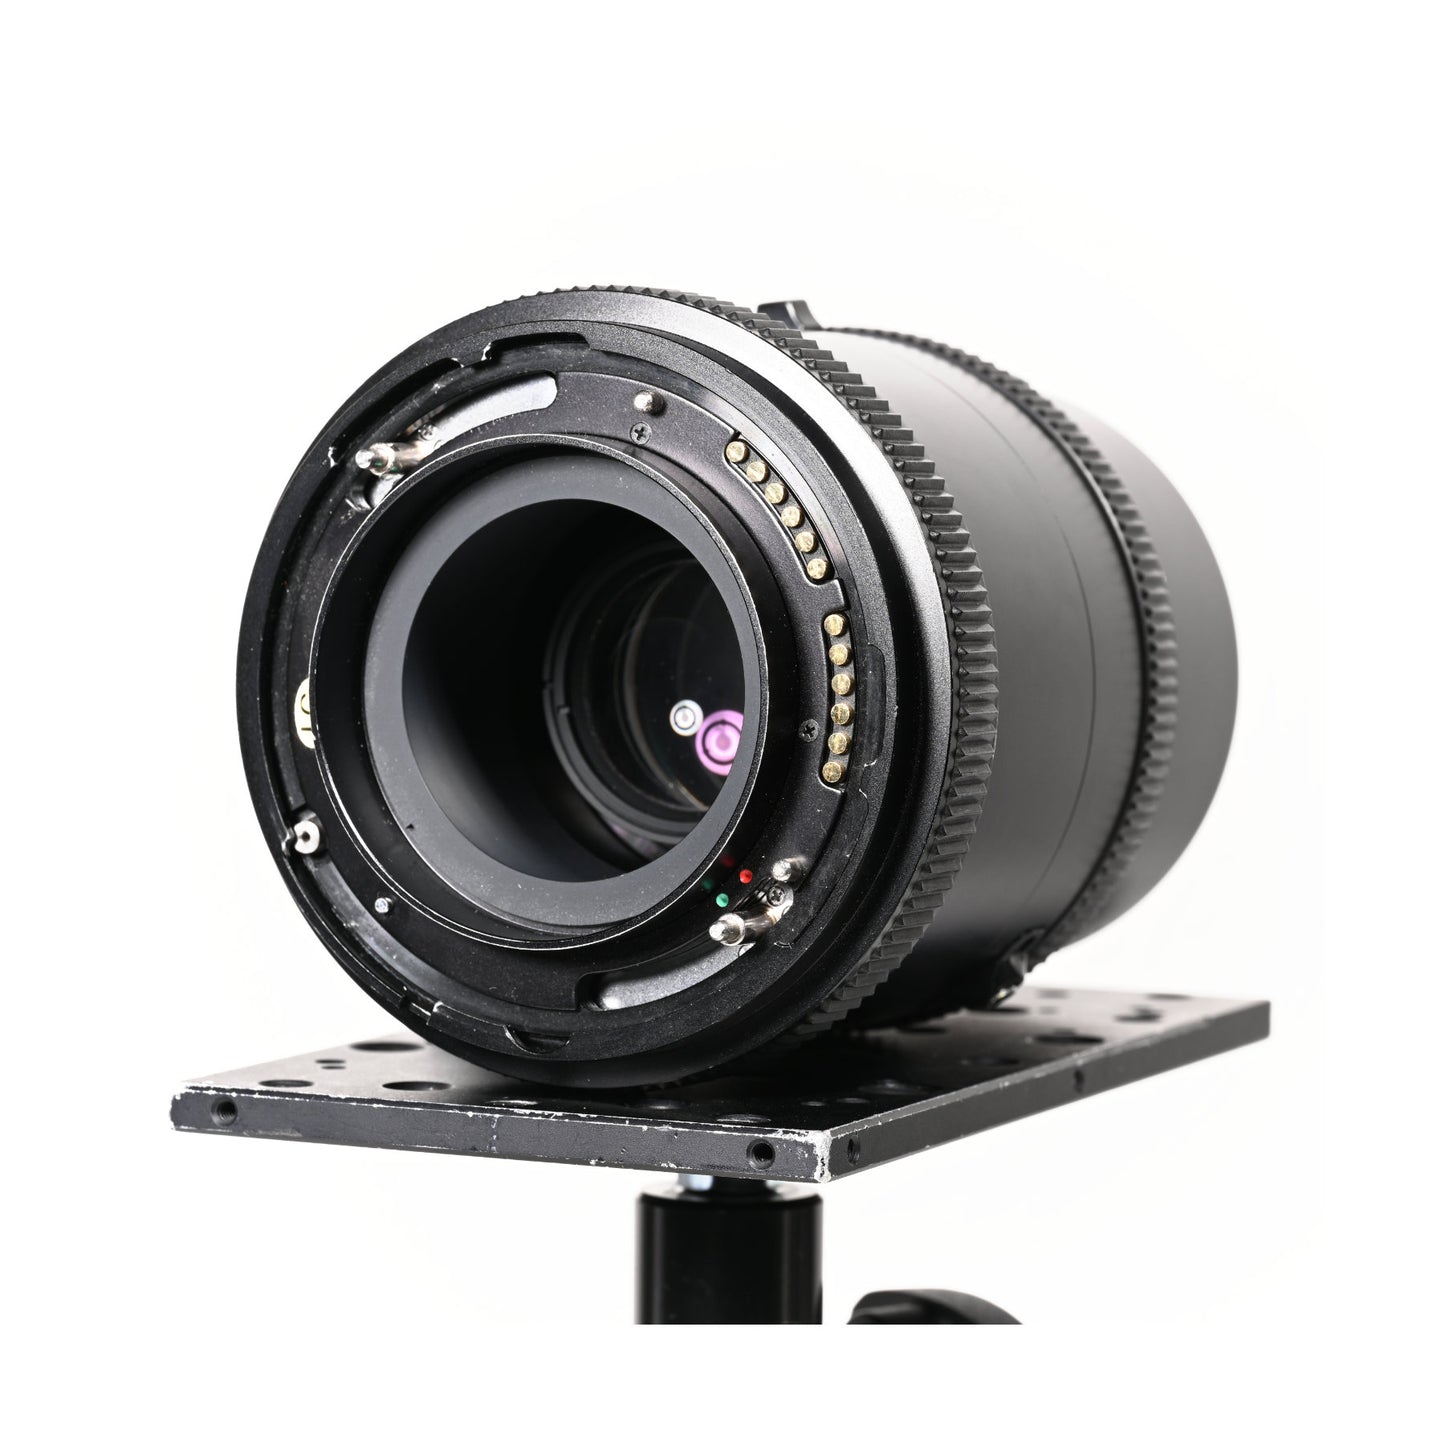 Buy Mamiya Sekor Z 180mm F4.5 W/N - Second Hand at Topic Store